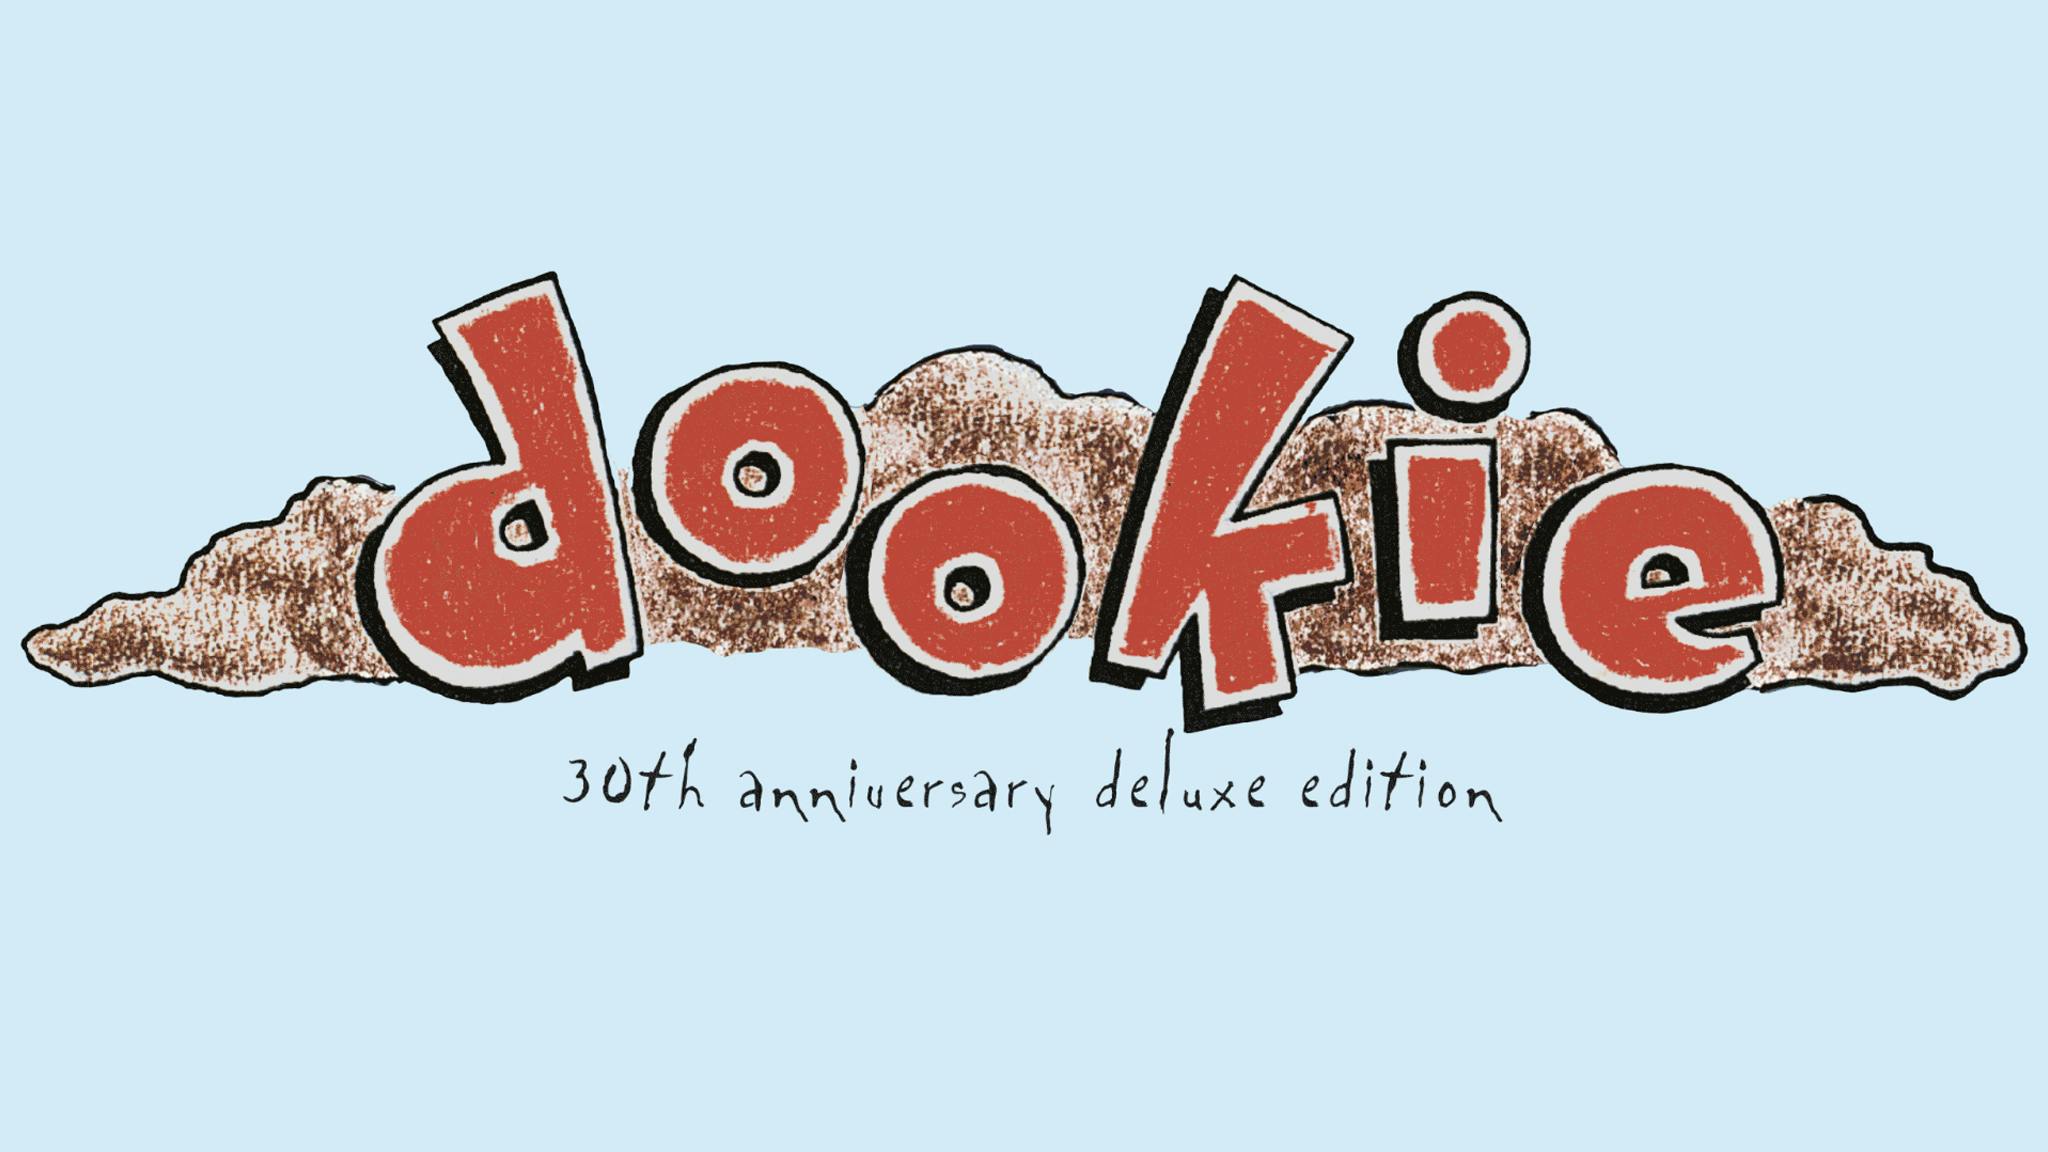 Green Day announce Dookie 30th anniversary deluxe reissue